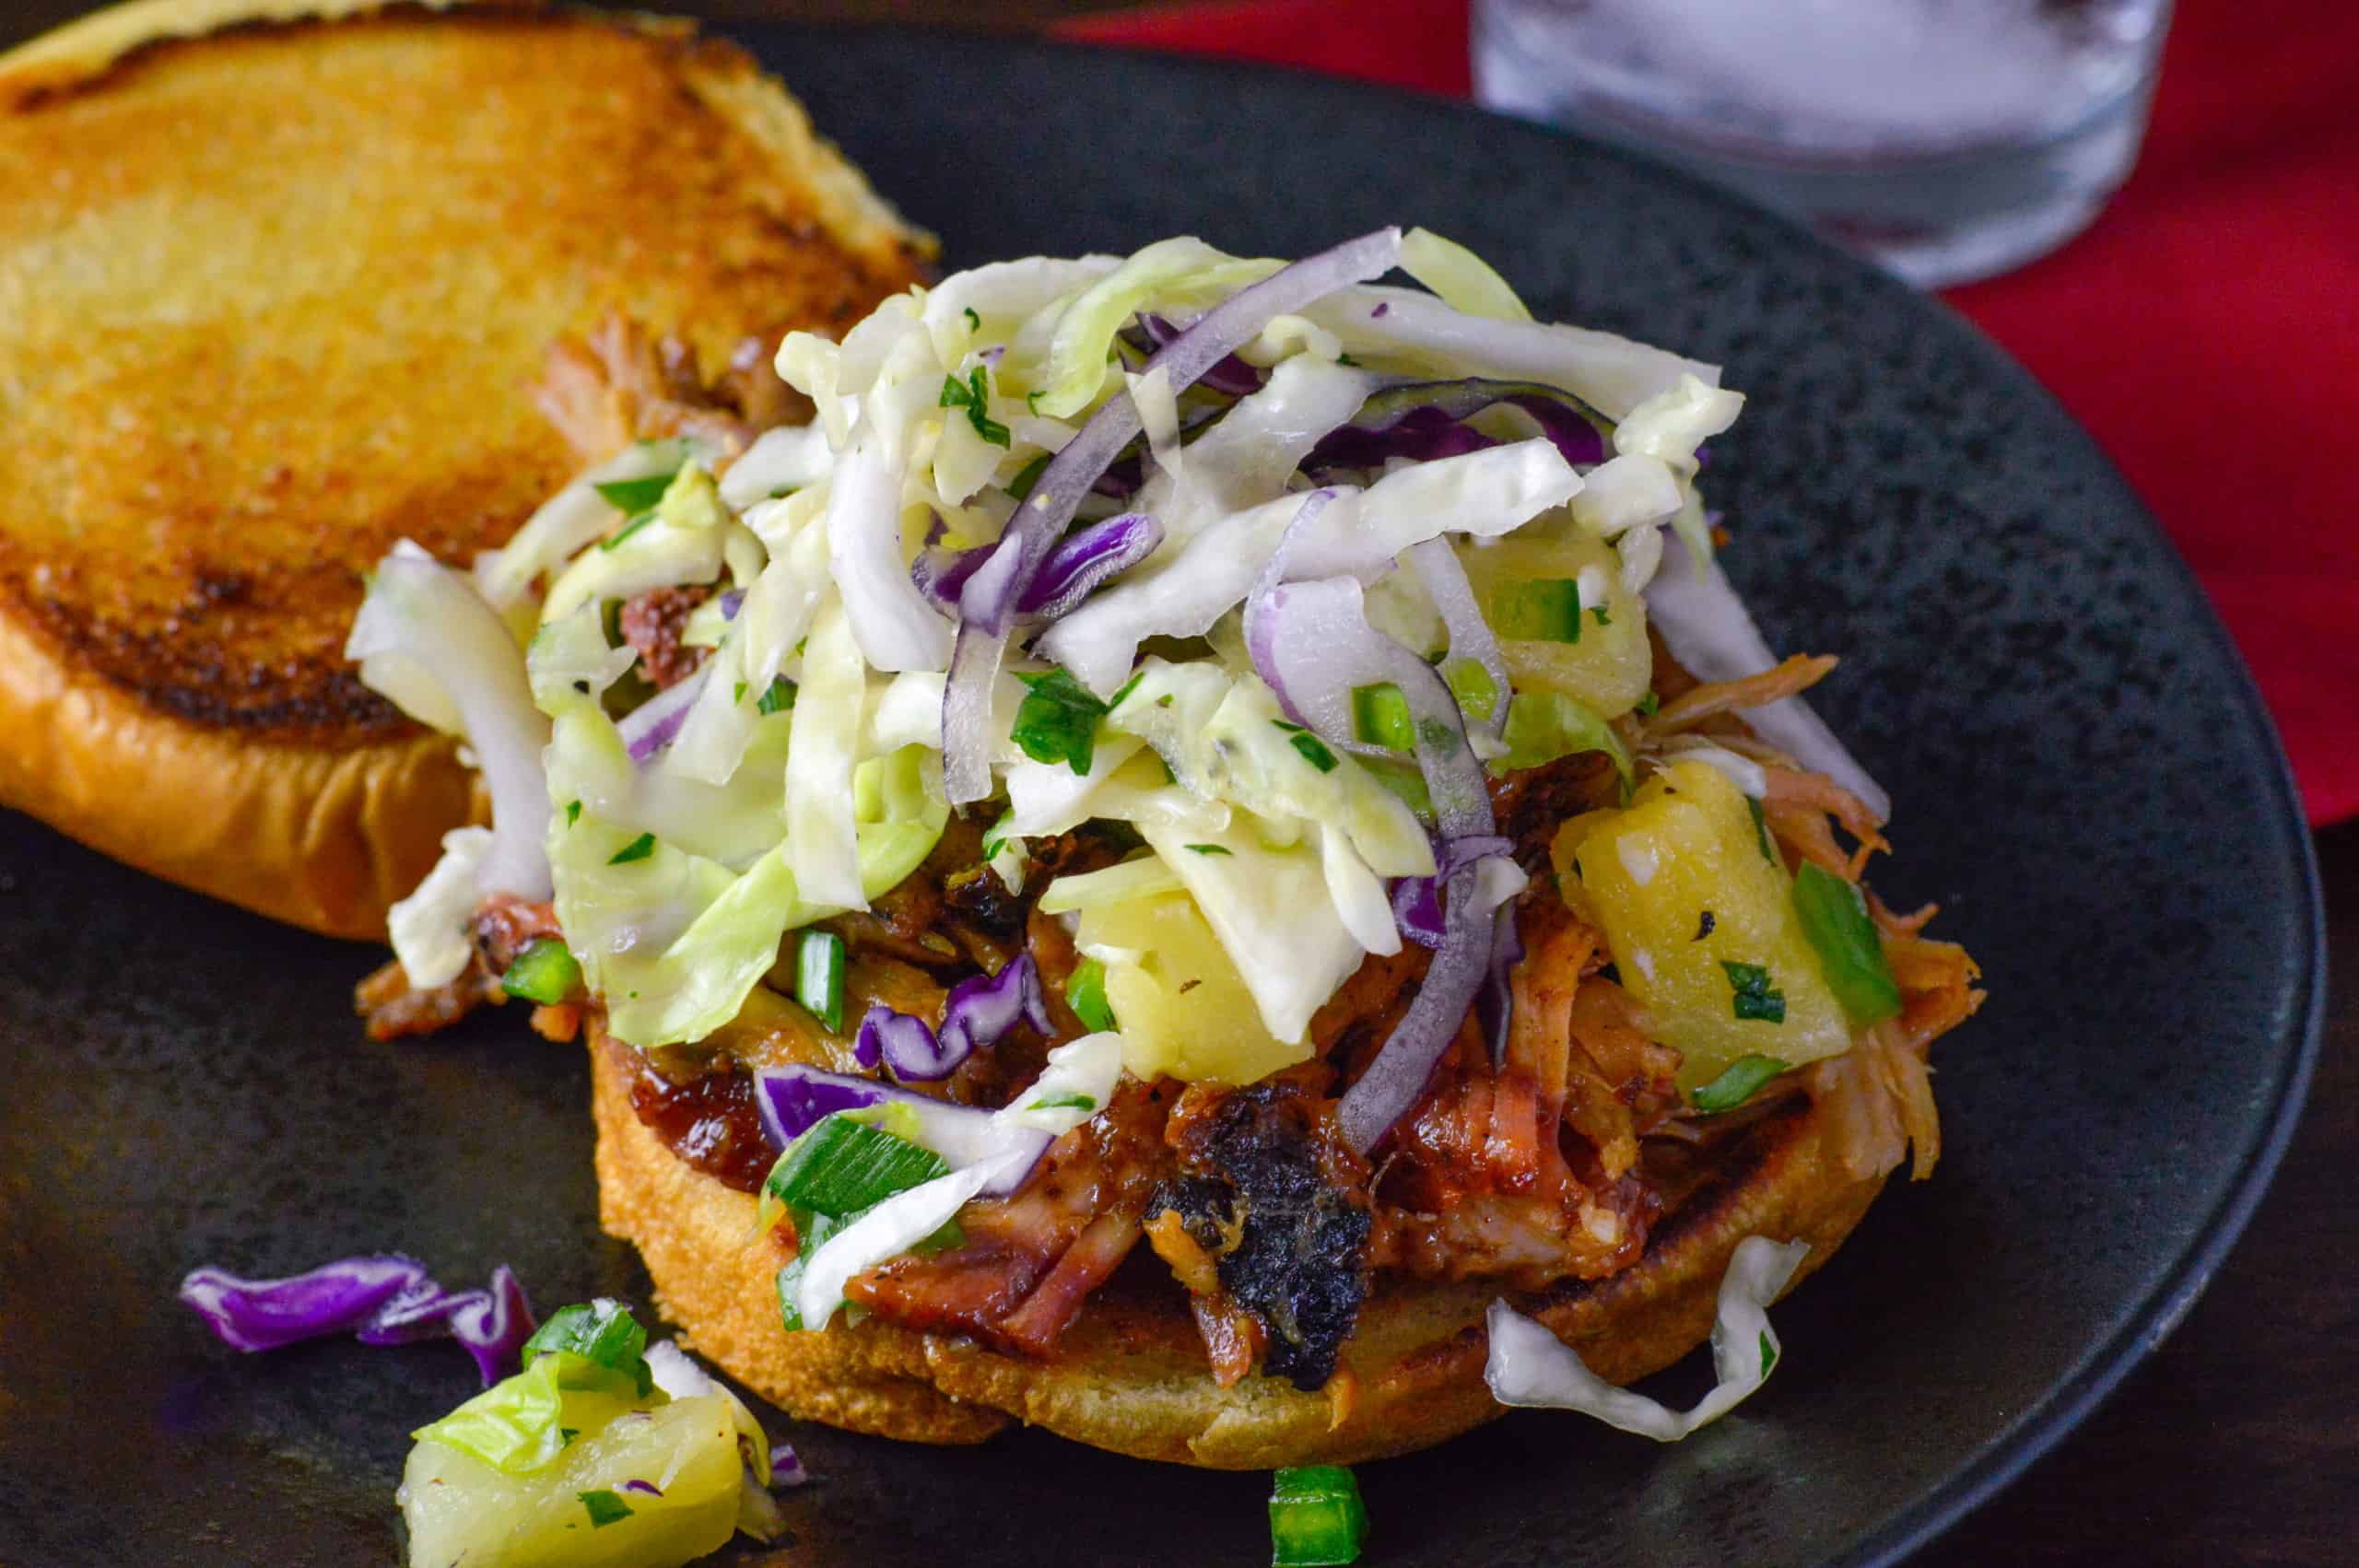 Mayo Free Pineapple slaw on Pulled pork sandwiches